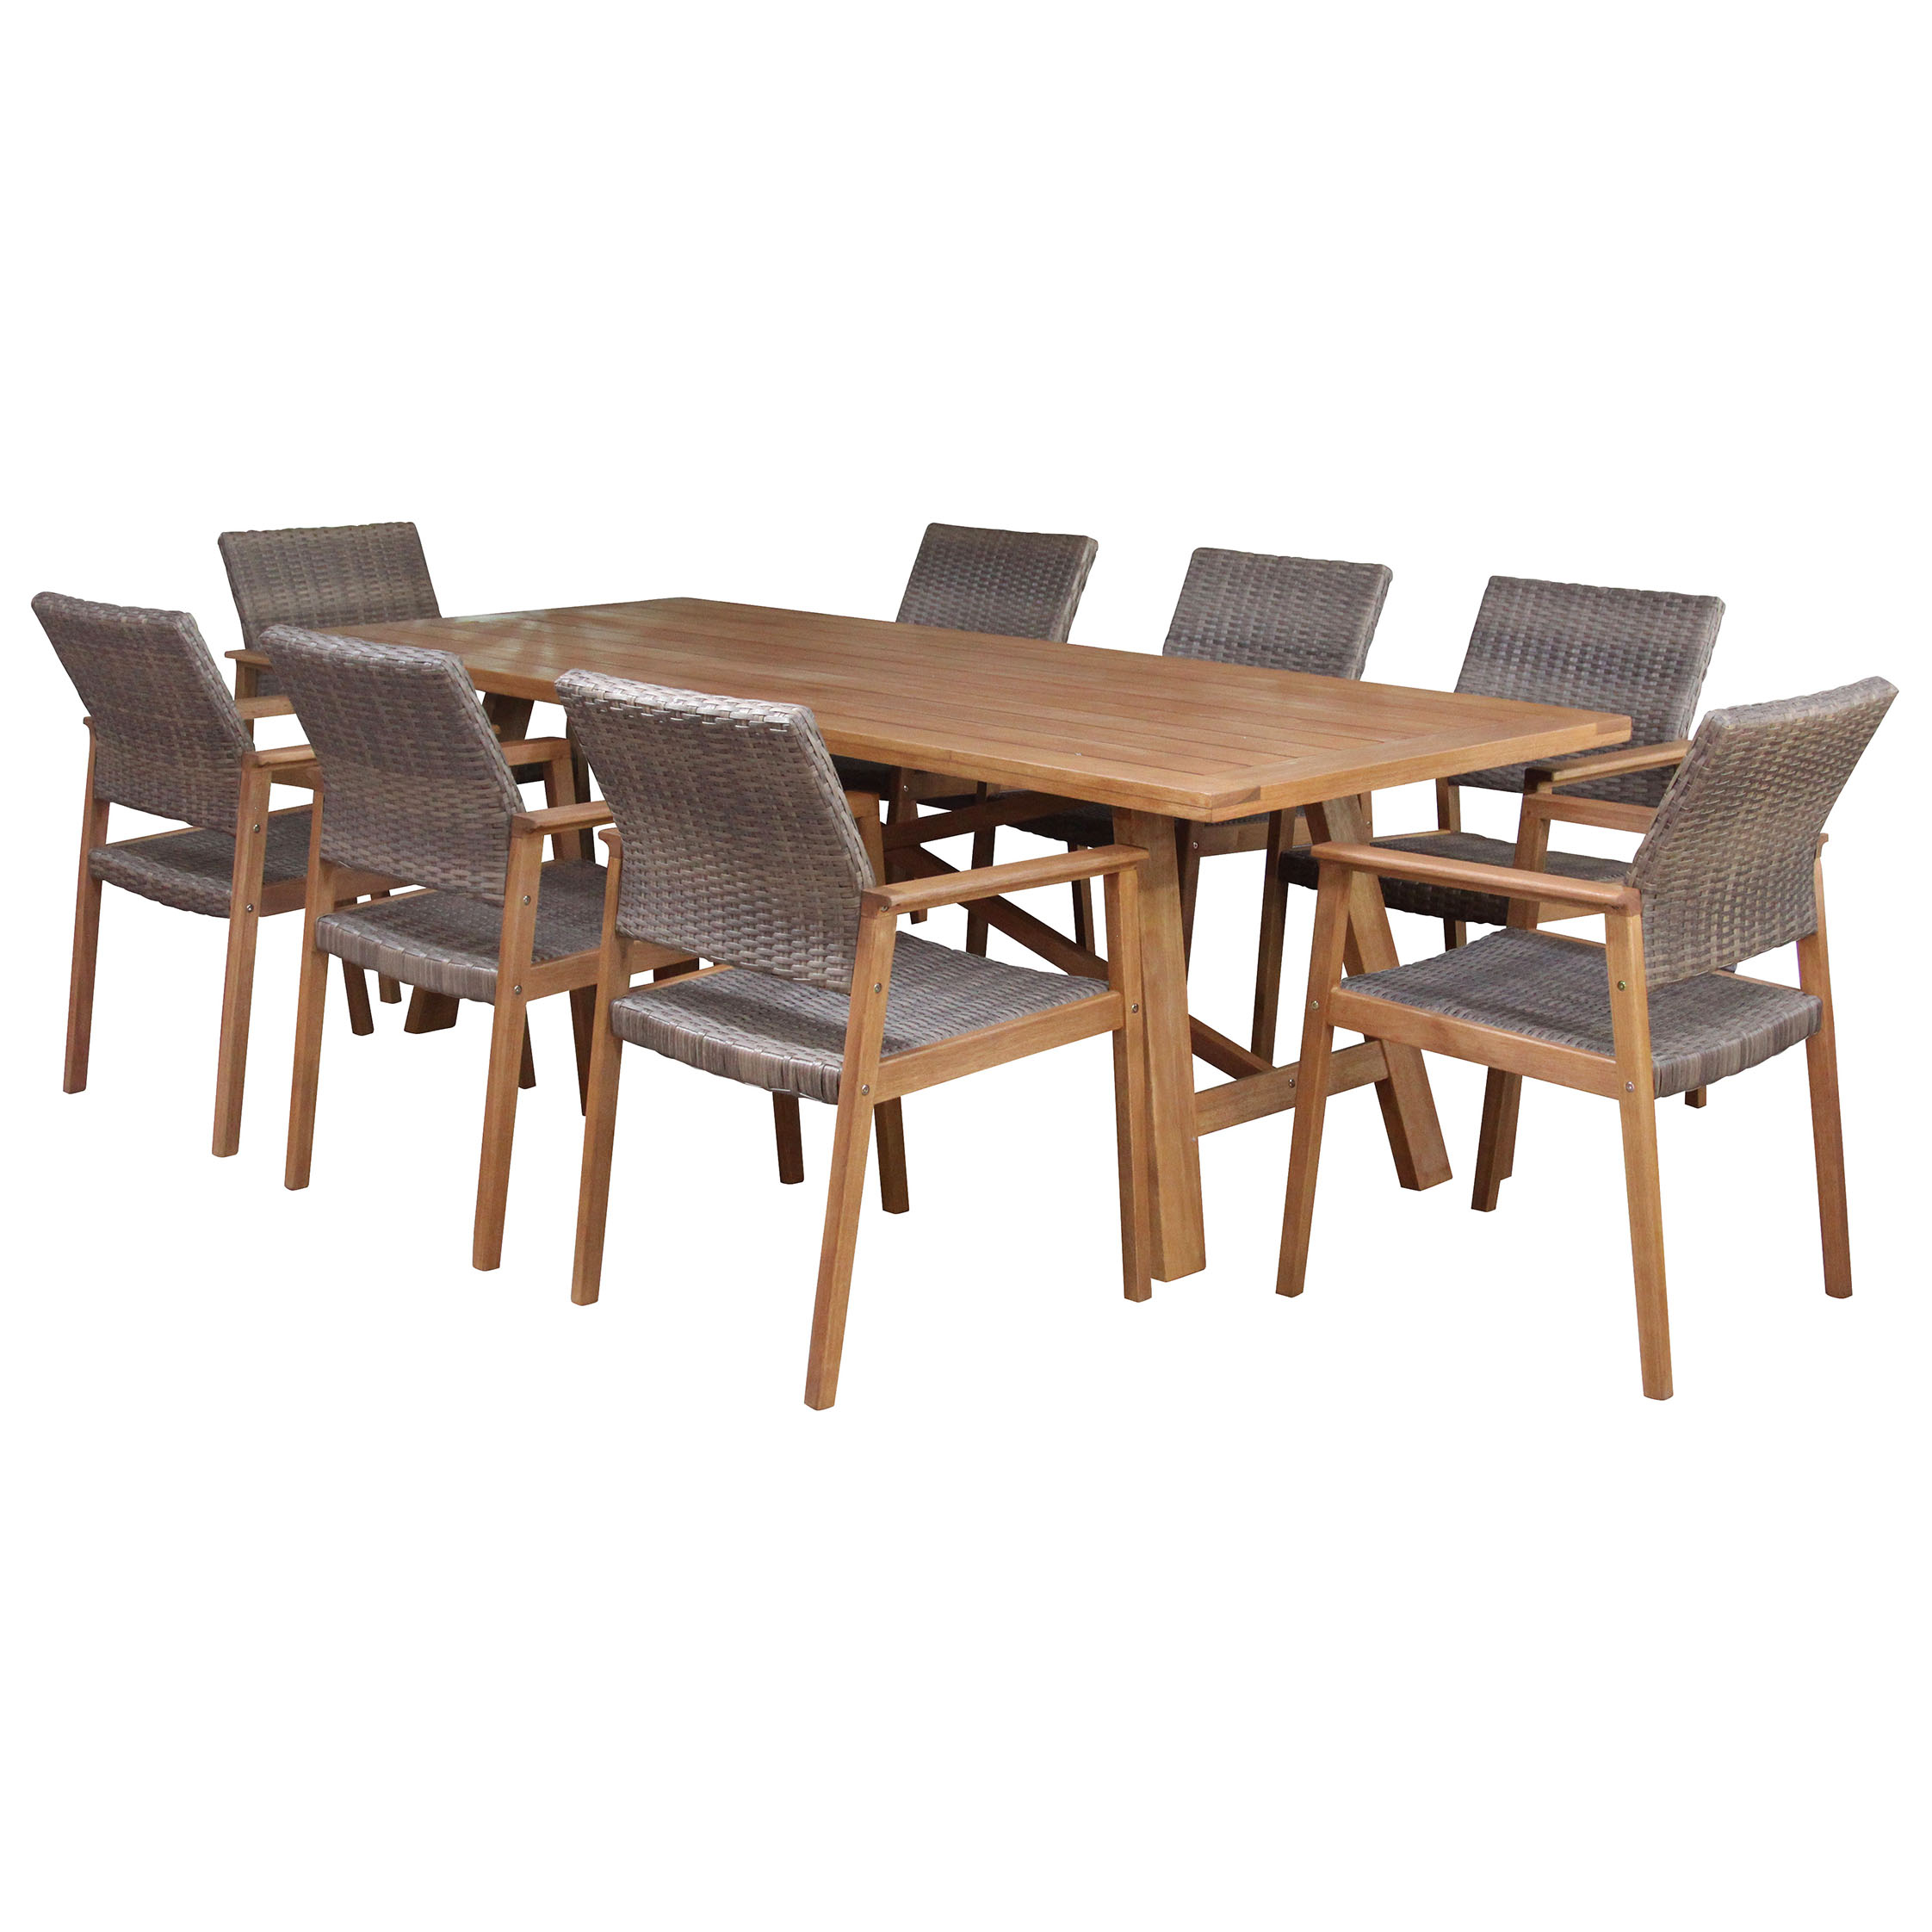 Cascade Set 8 Seater With Capri Wood And Wicker Chairs intended for sizing 2244 X 2244